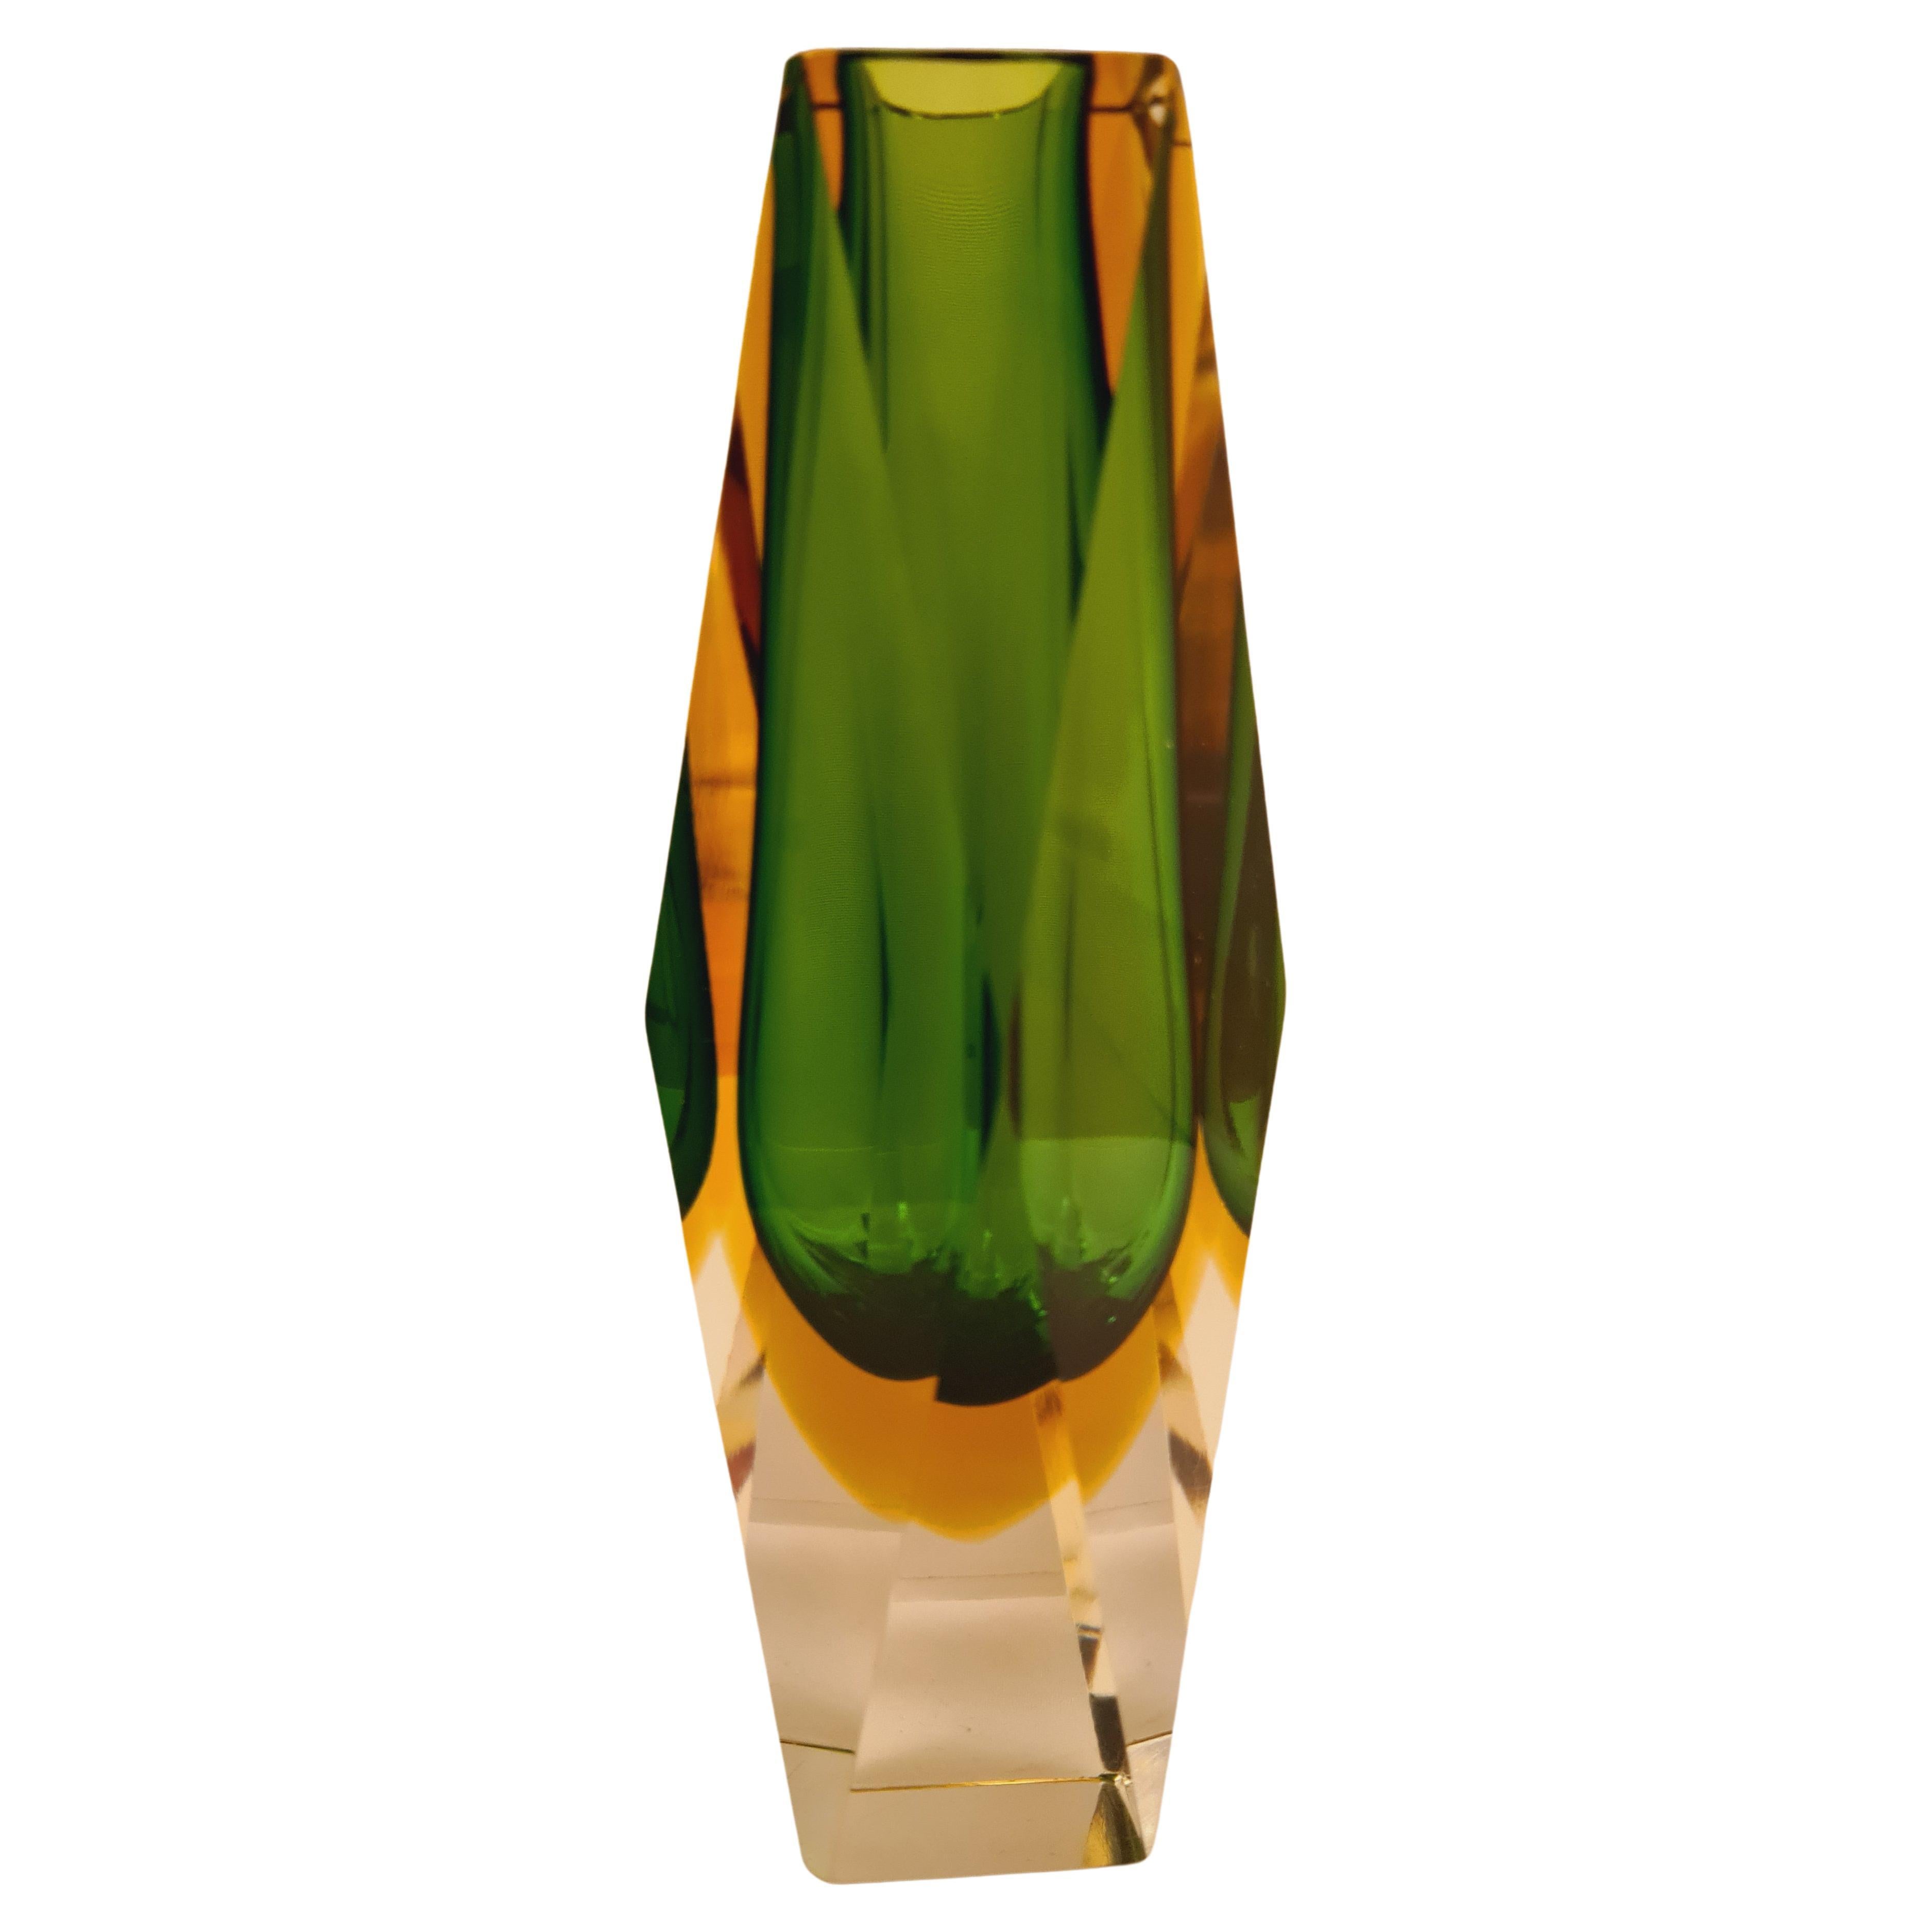 Middle of Century Faceted Sommerso Murano Glass Vase